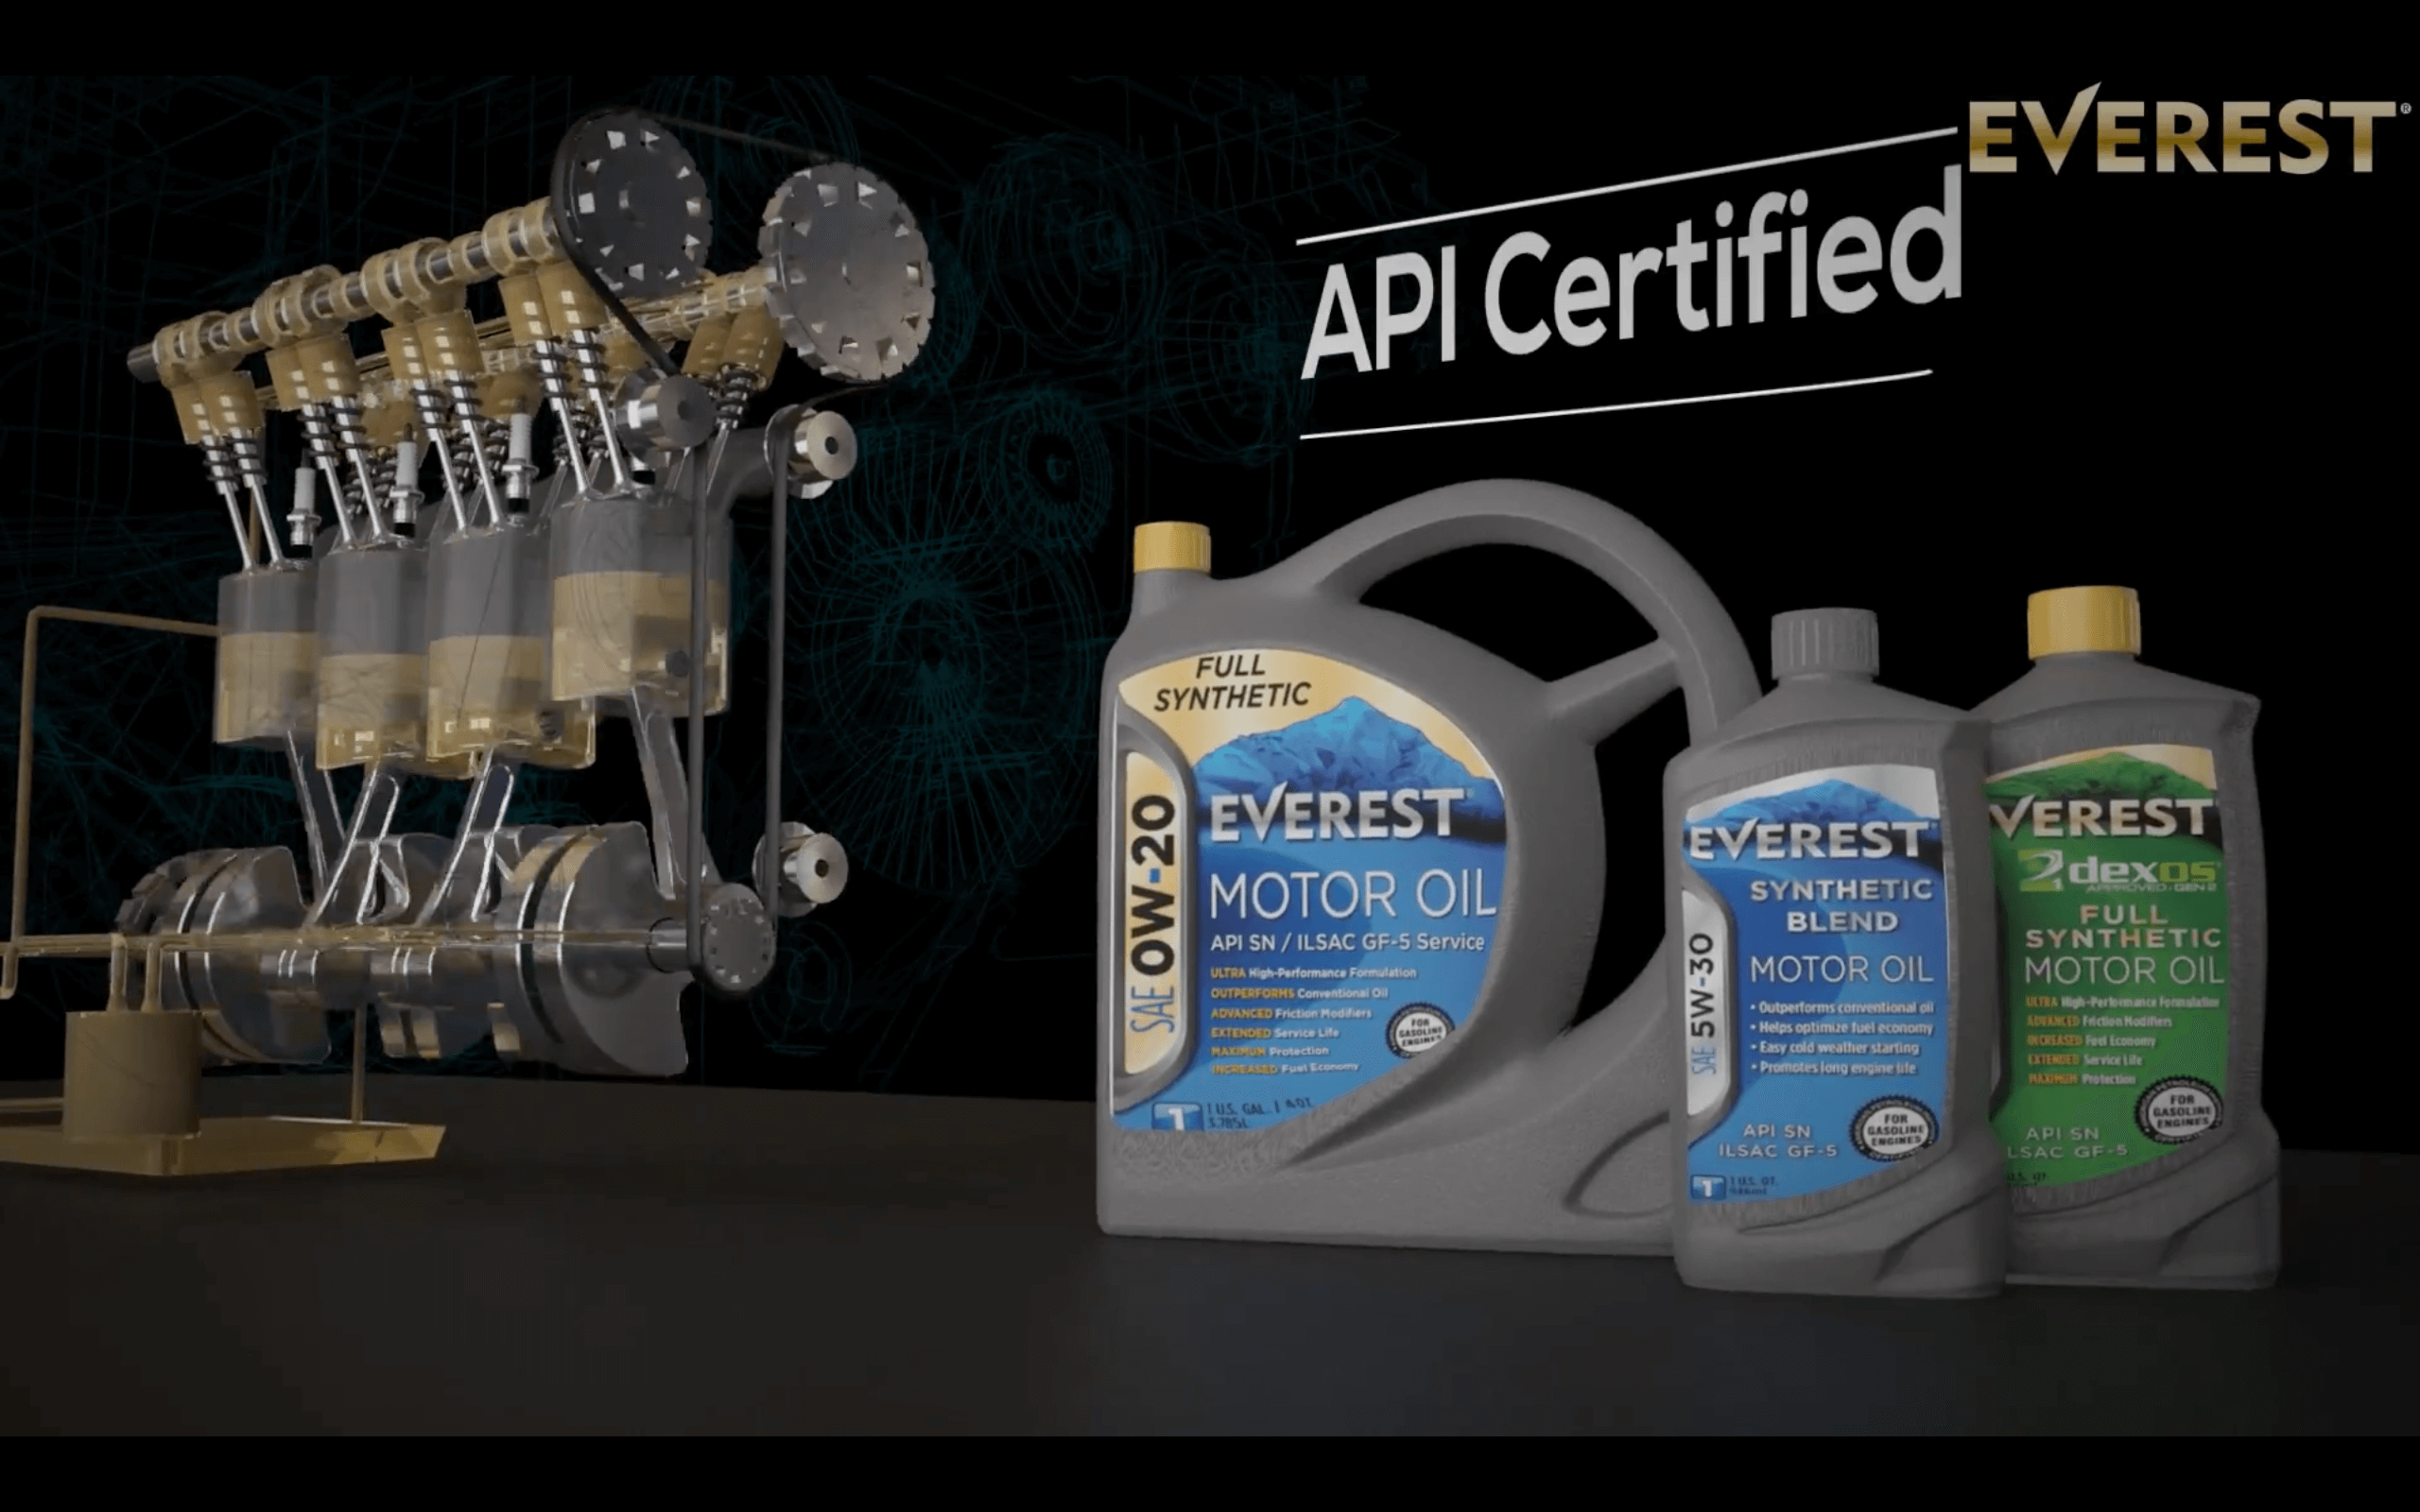 Check out our new Everest Motor Oil video!